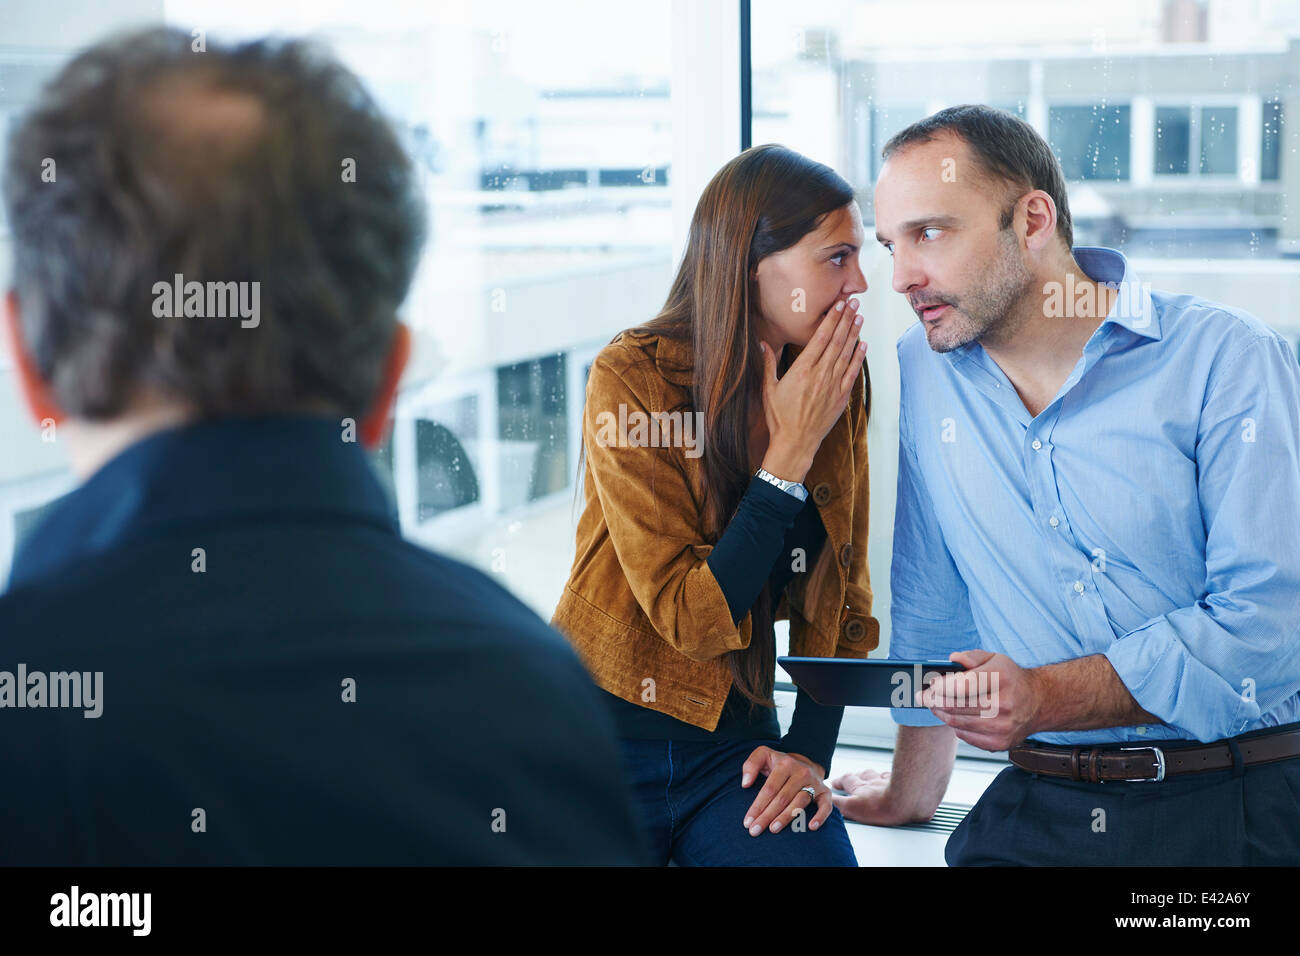 Businesswoman whispering to man in office Banque D'Images